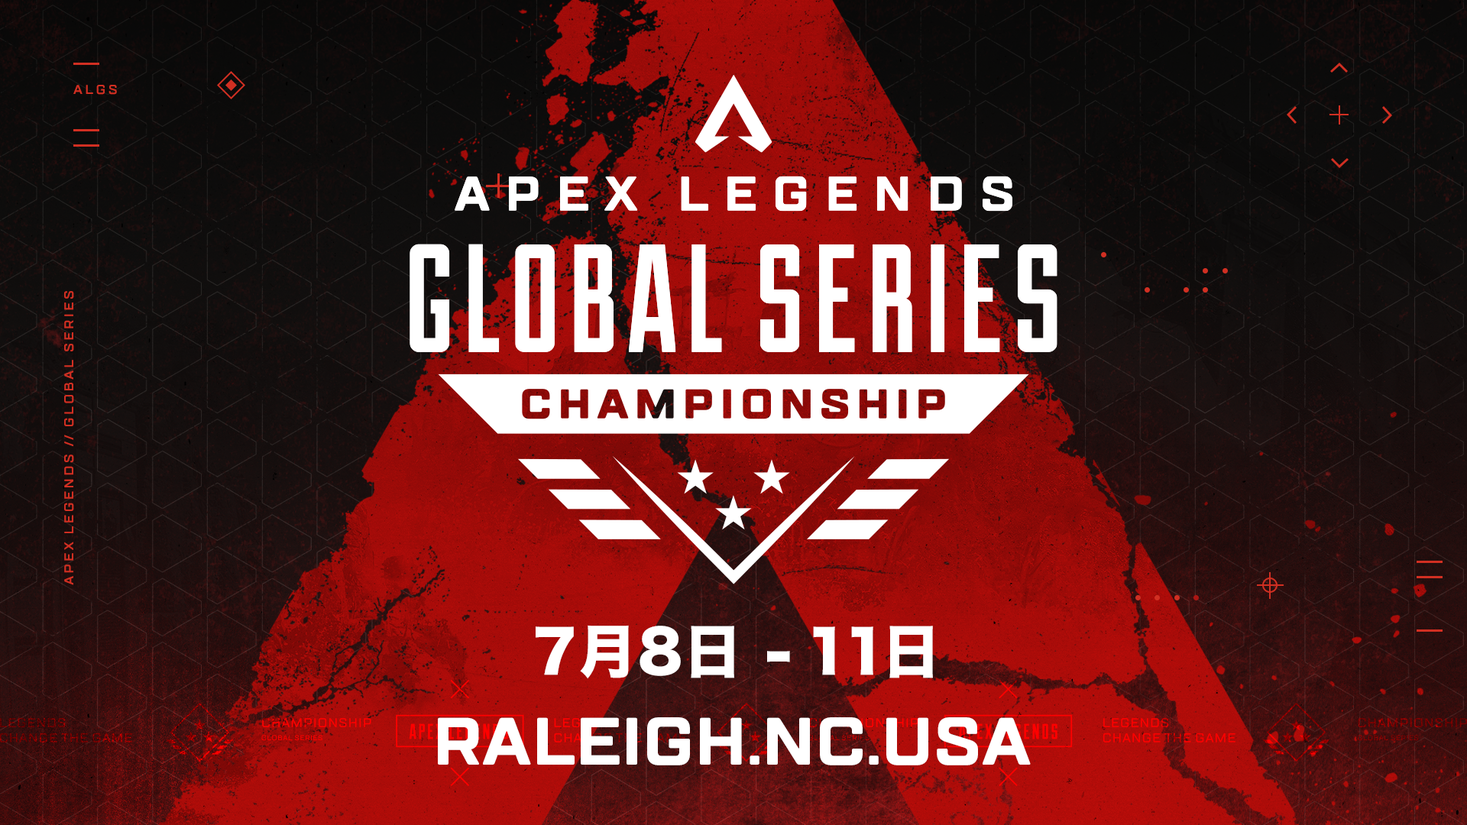 "Apex Legends Global Series Championship" will be held for the first